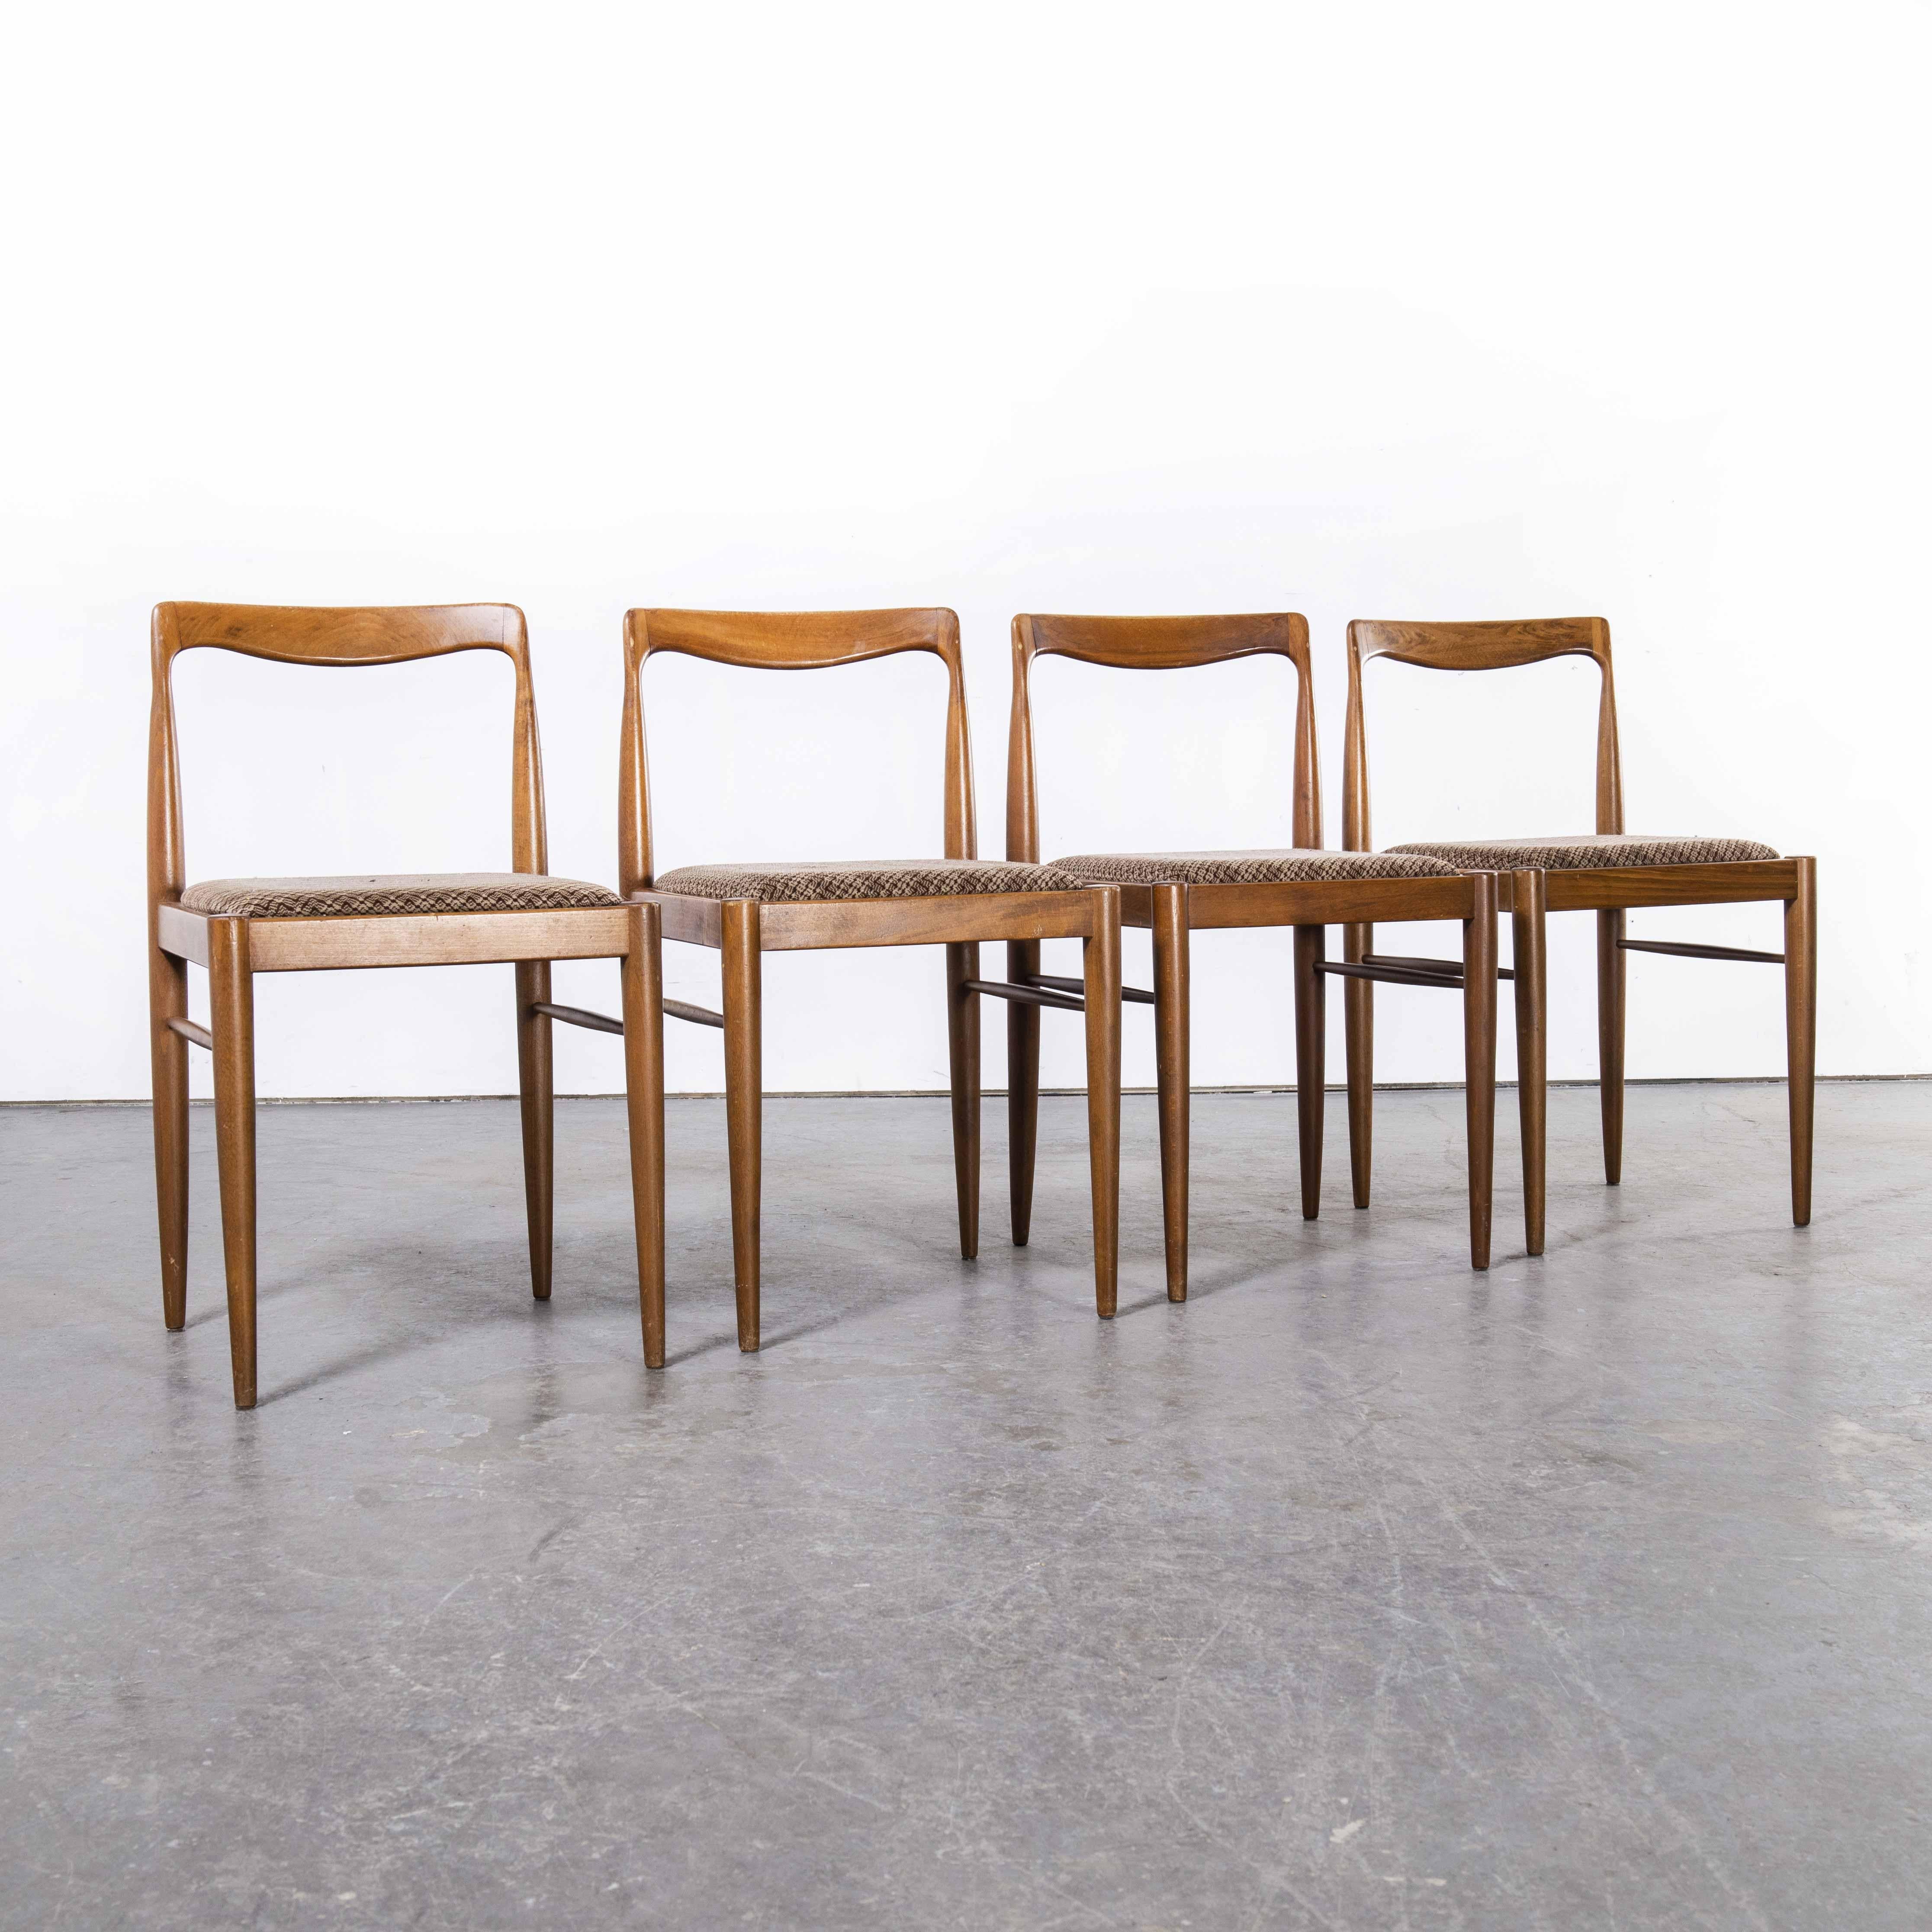 1950's Mid Century Teak Dining Chairs, Set of Four For Sale 2